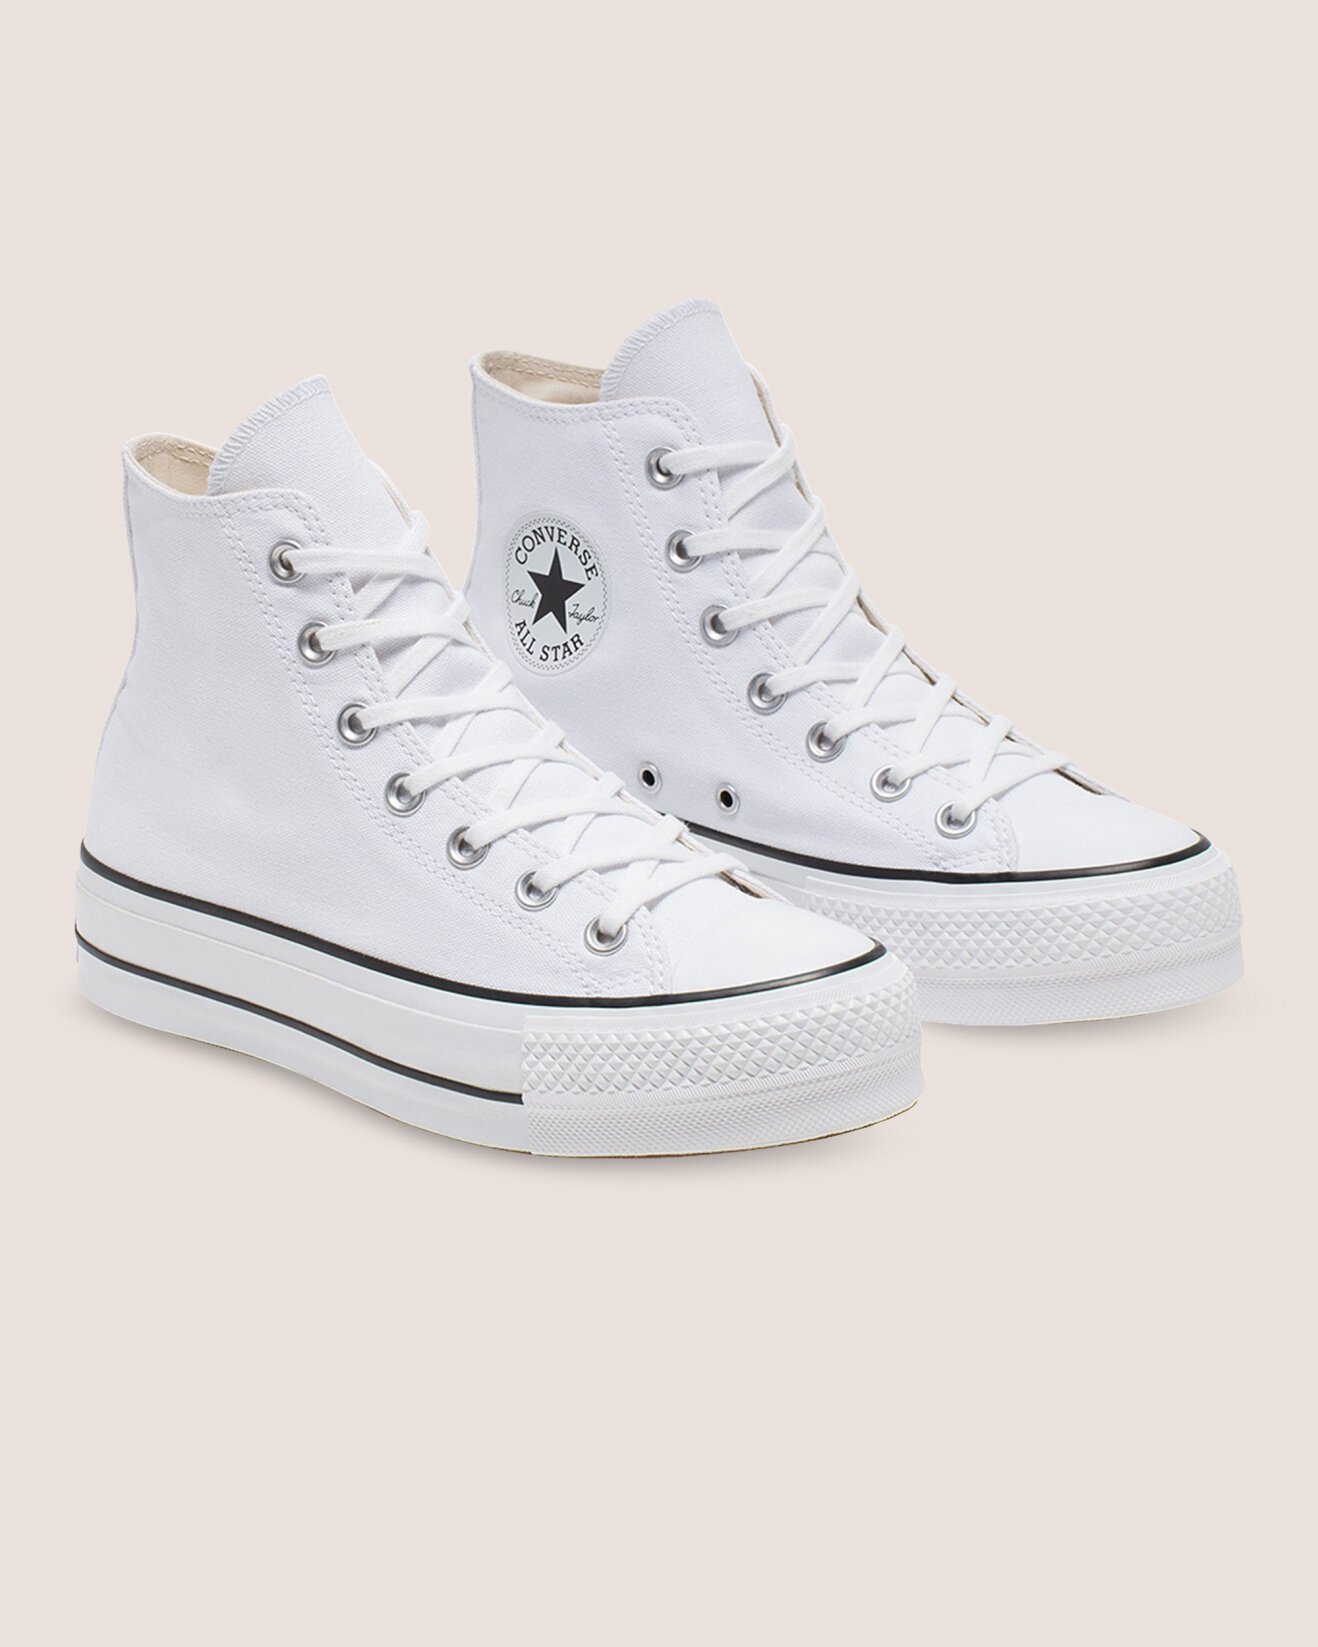 Converse Taylor All Canvas Lift High Top Womens Buy Online - Ph: 1800-370-766 - AfterPay & Available!